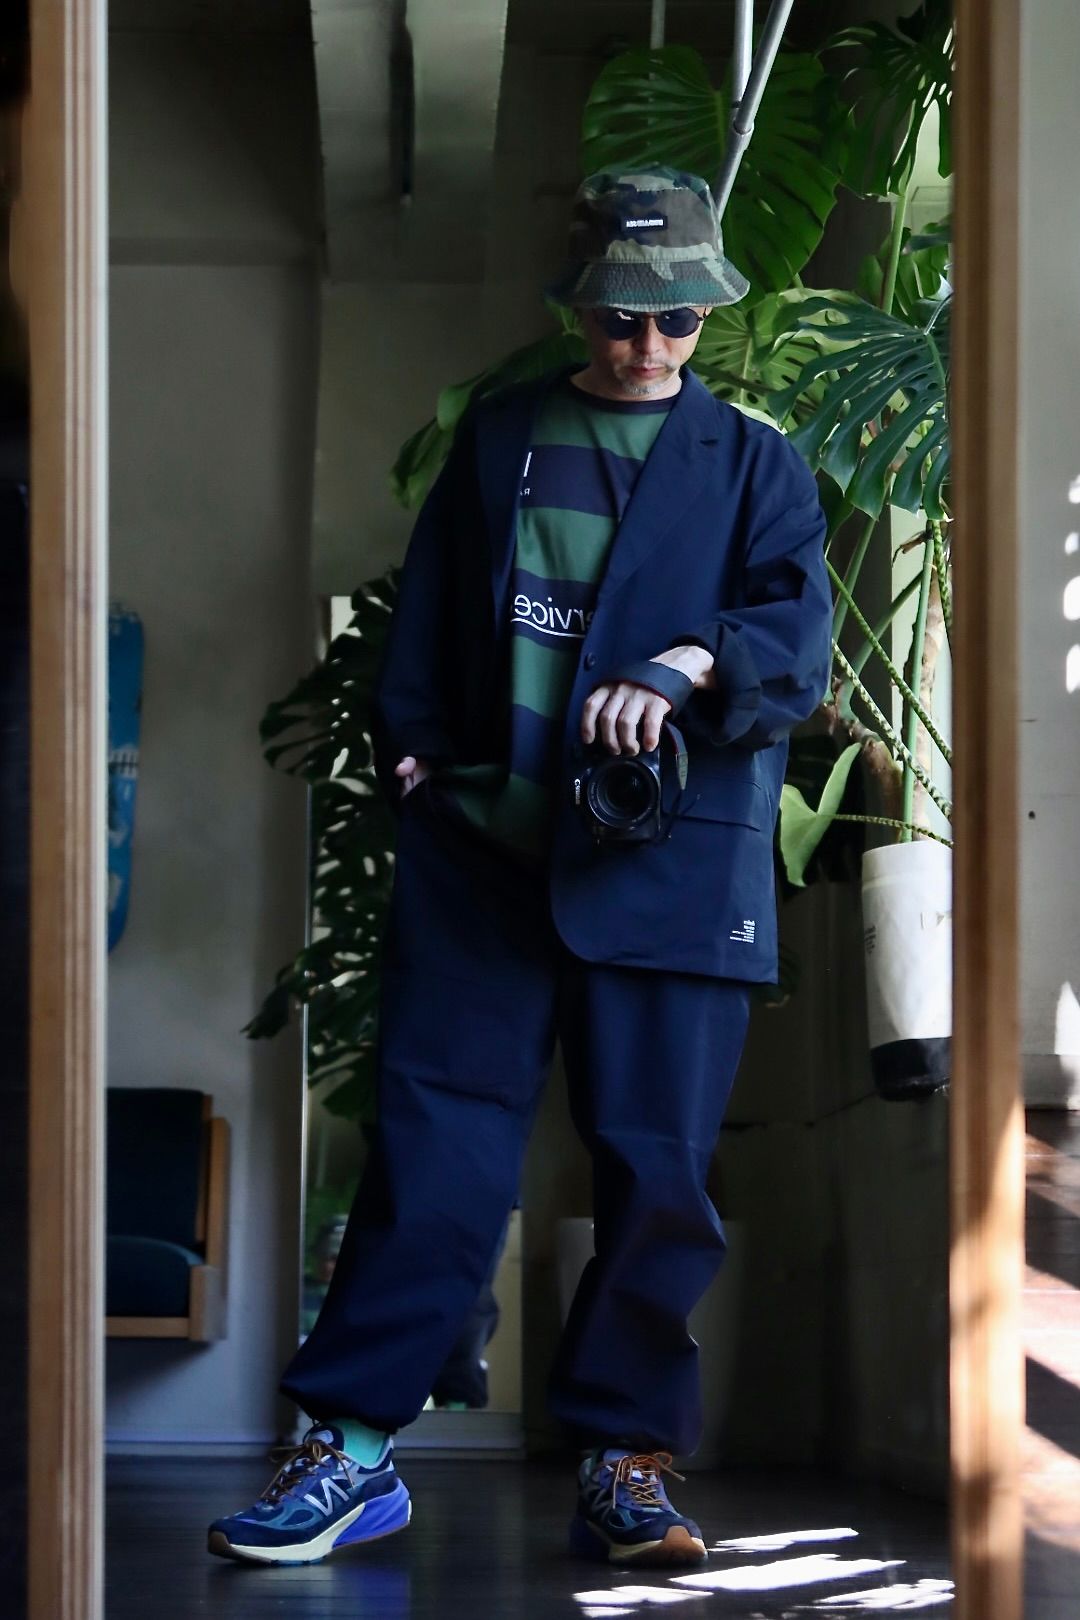 FreshService × HOUYHNHNM “EDITOR'S JACKET” & “EDITOR'S TROUSERS 